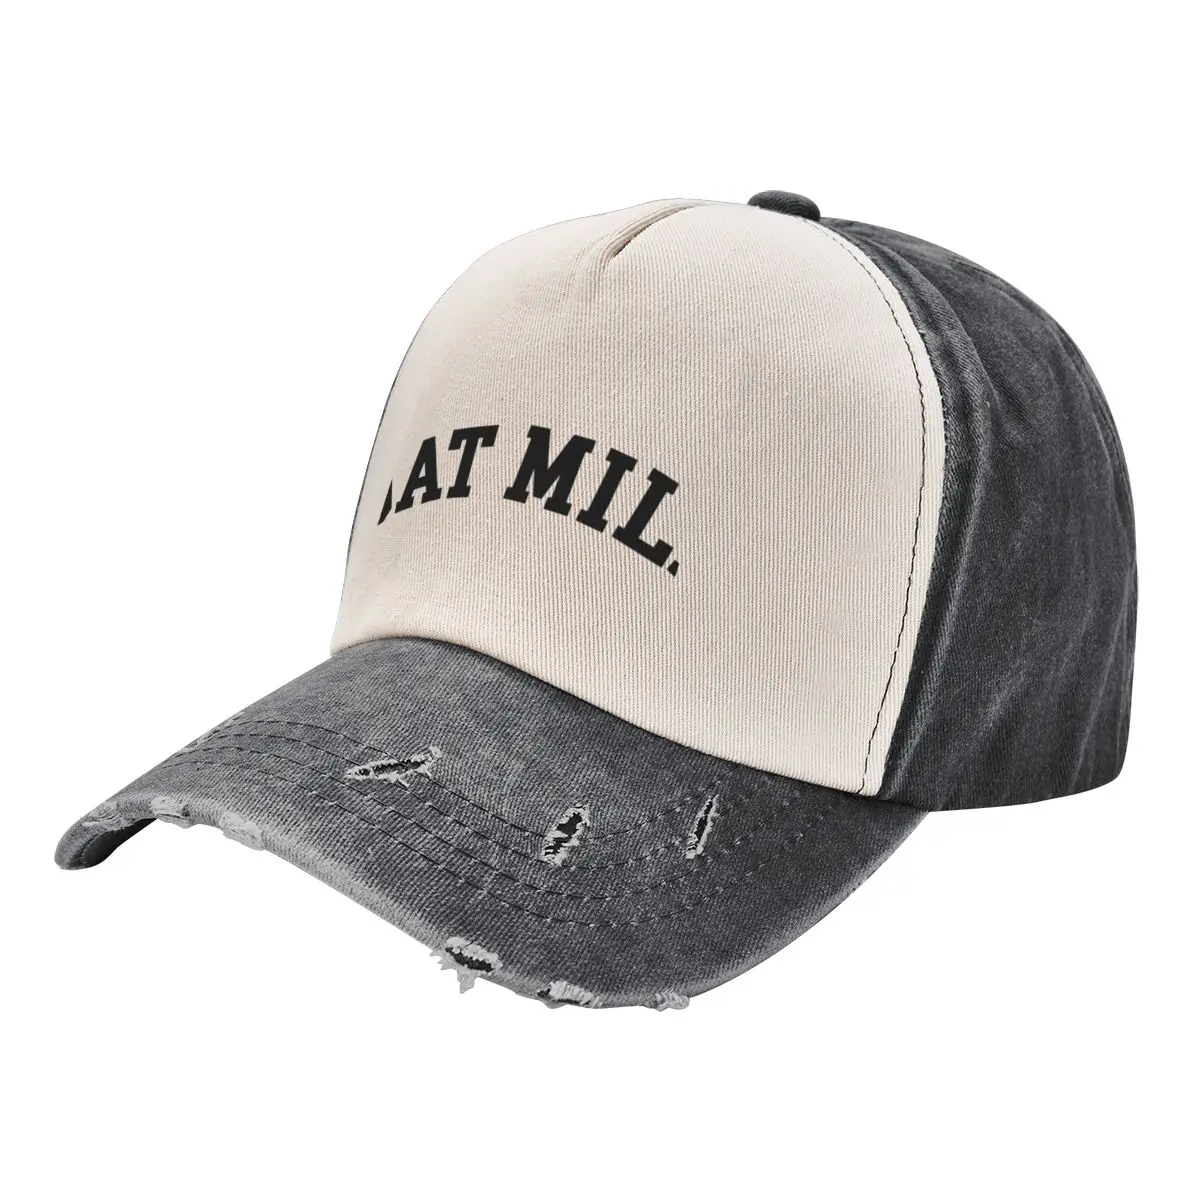 

oat milk - urban outfitters aesthetic sold out design Baseball Cap hard hat Hat Beach Women's Hats For The Sun Men's